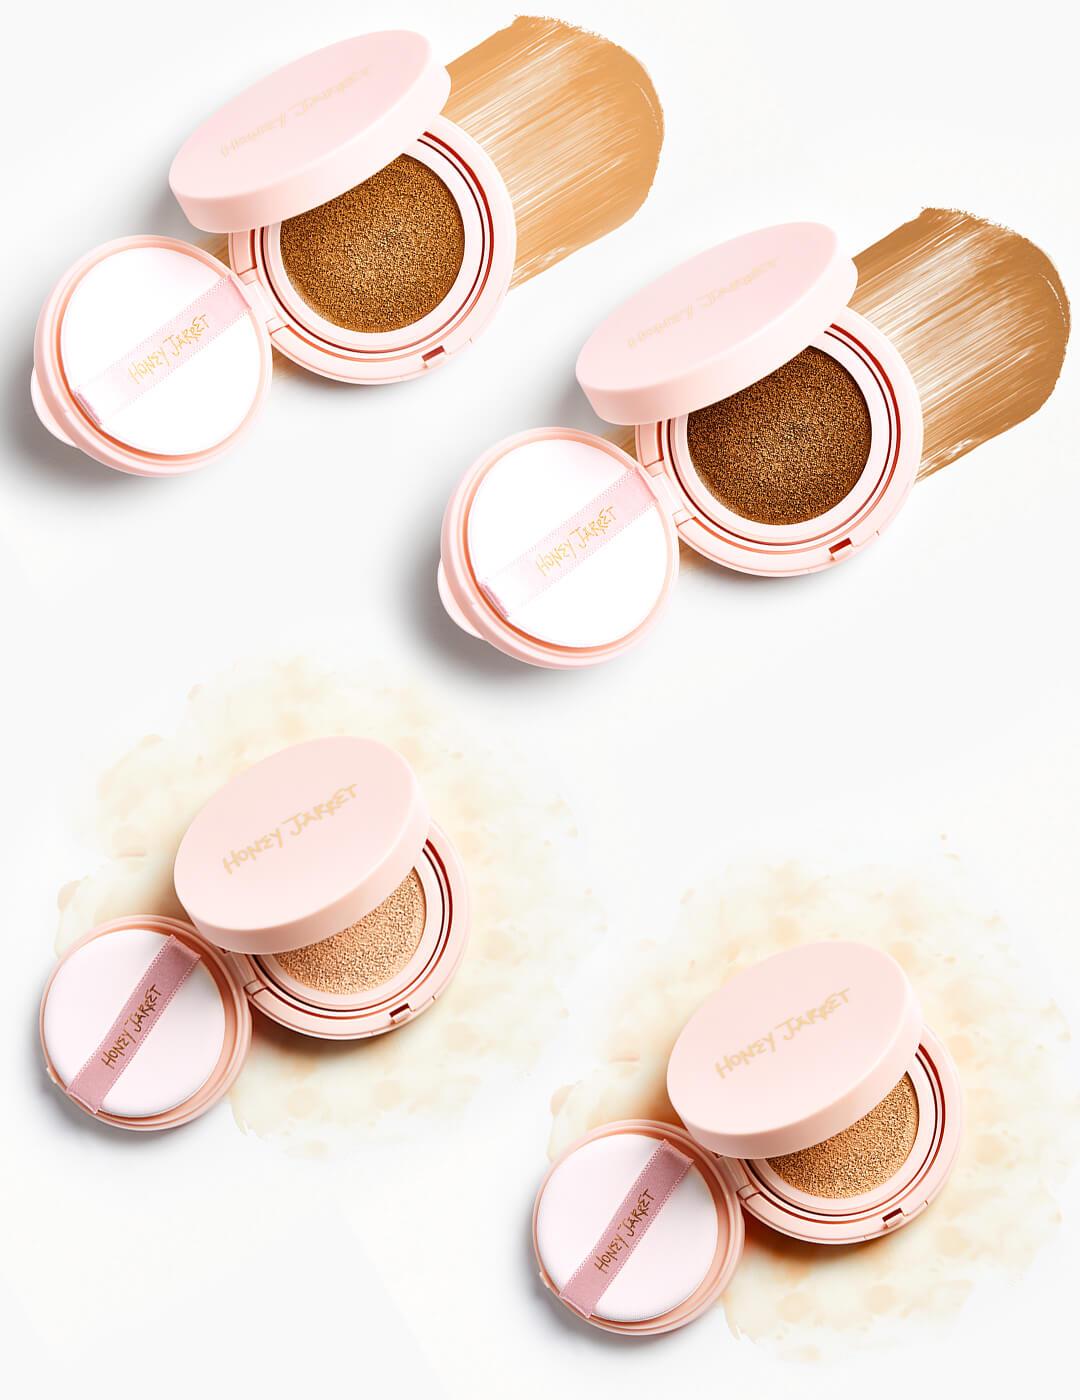 An image of HONEY JARRET Clean Cover Cushion Foundation in Tan Cocoa, Light Vanilla, Light Ivory, and Golden Honey.